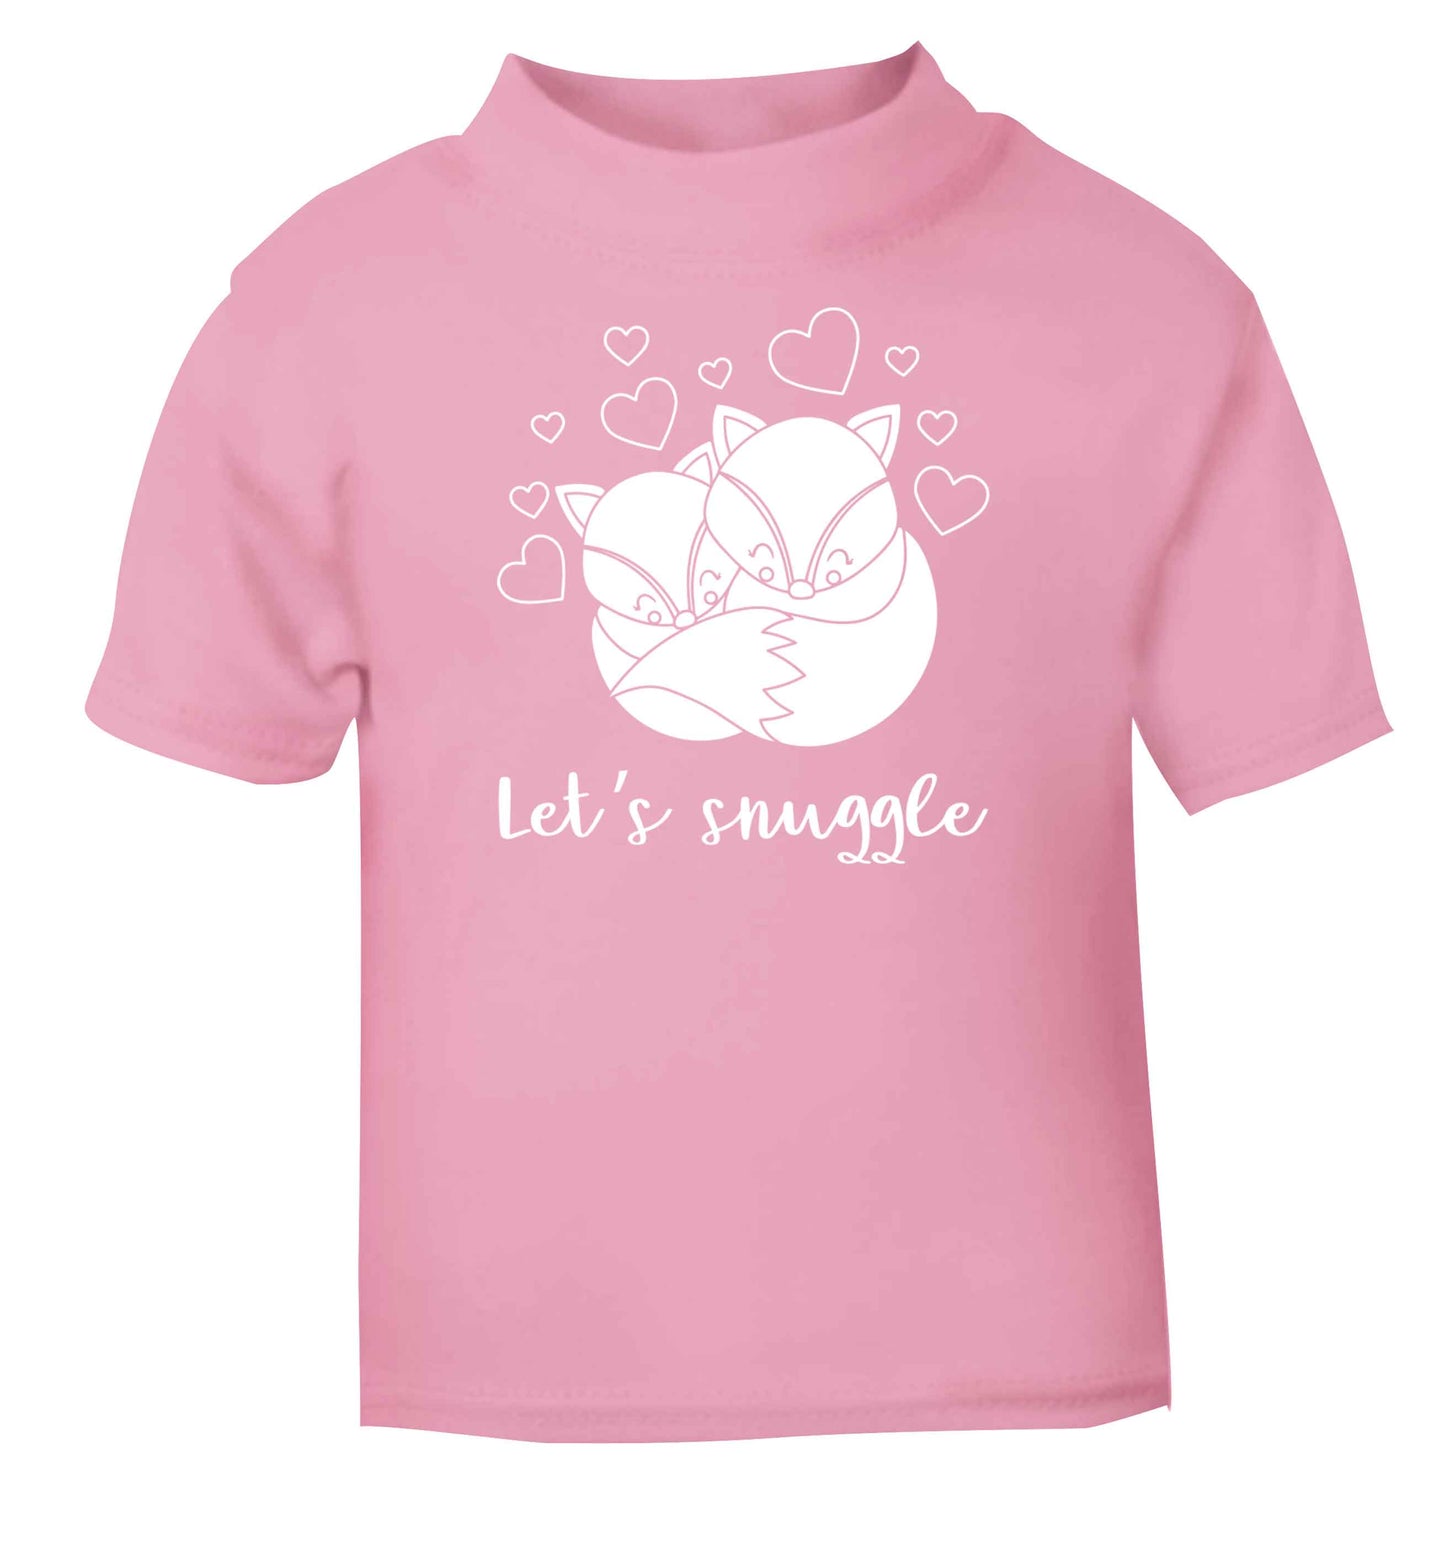 Let's snuggle light pink baby toddler Tshirt 2 Years